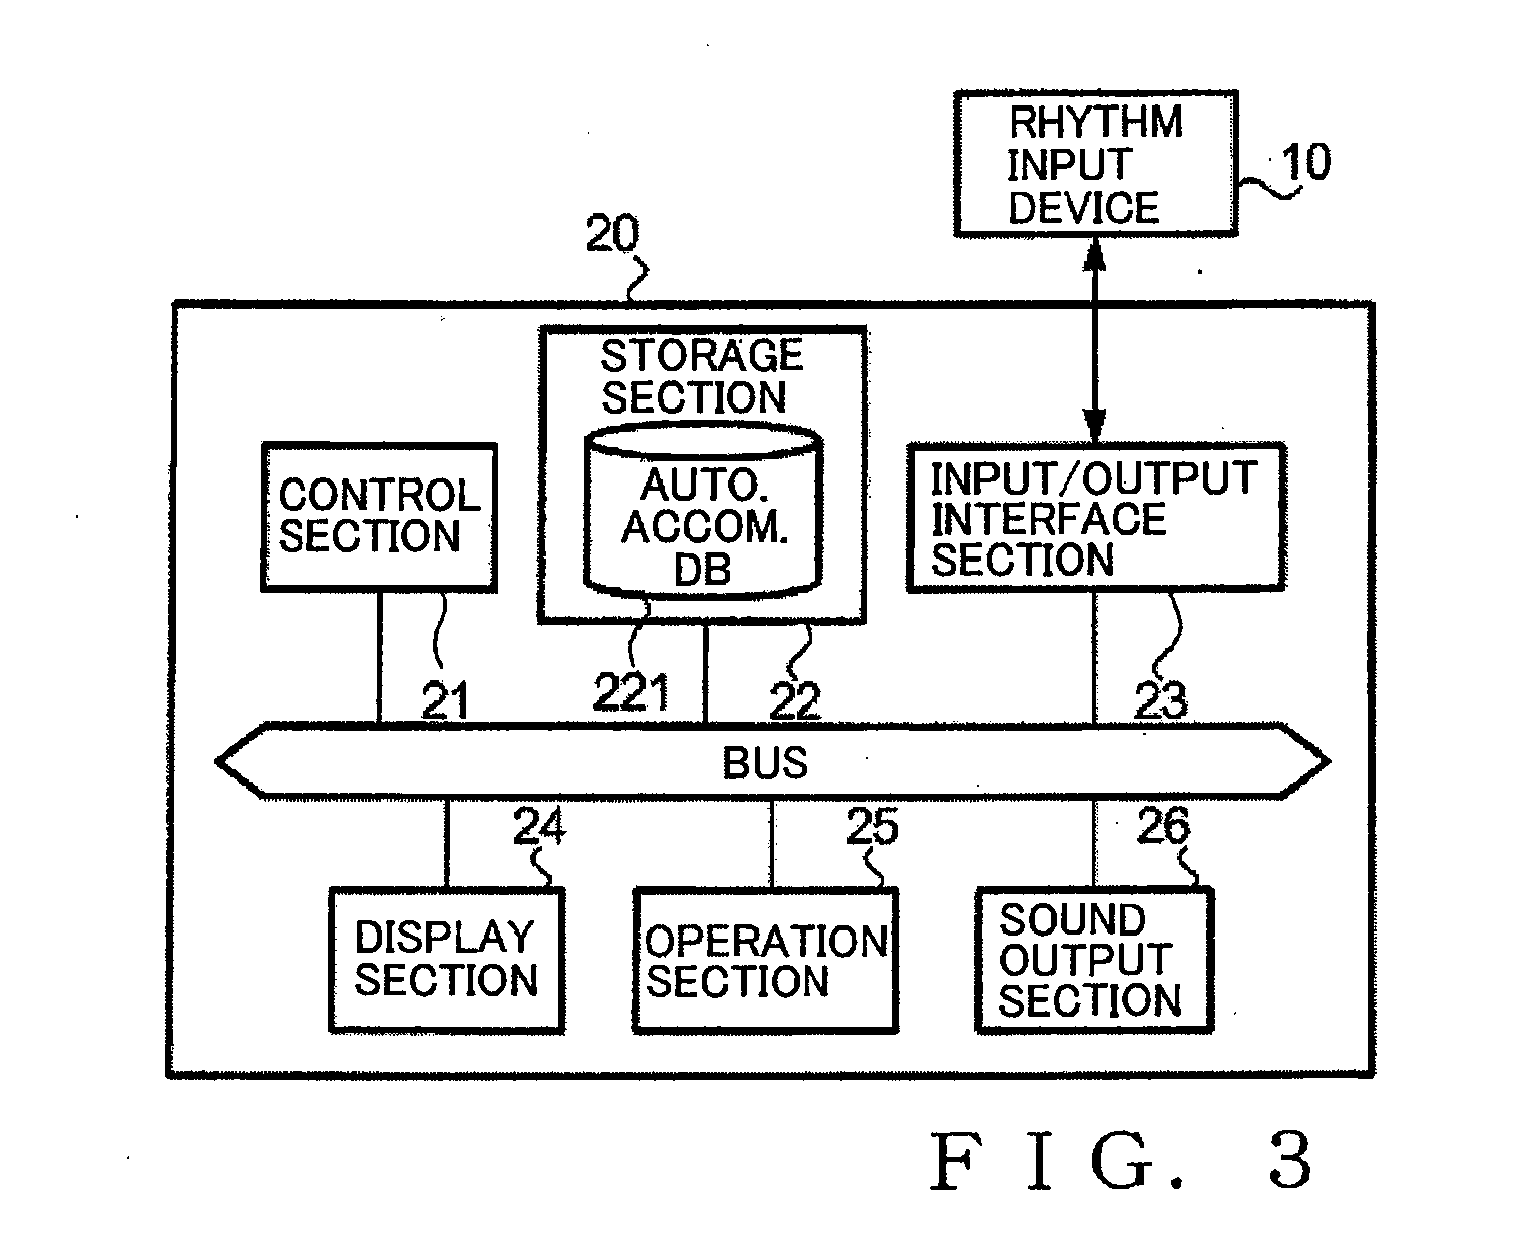 Performance data search using a query indicative of a tone generation pattern